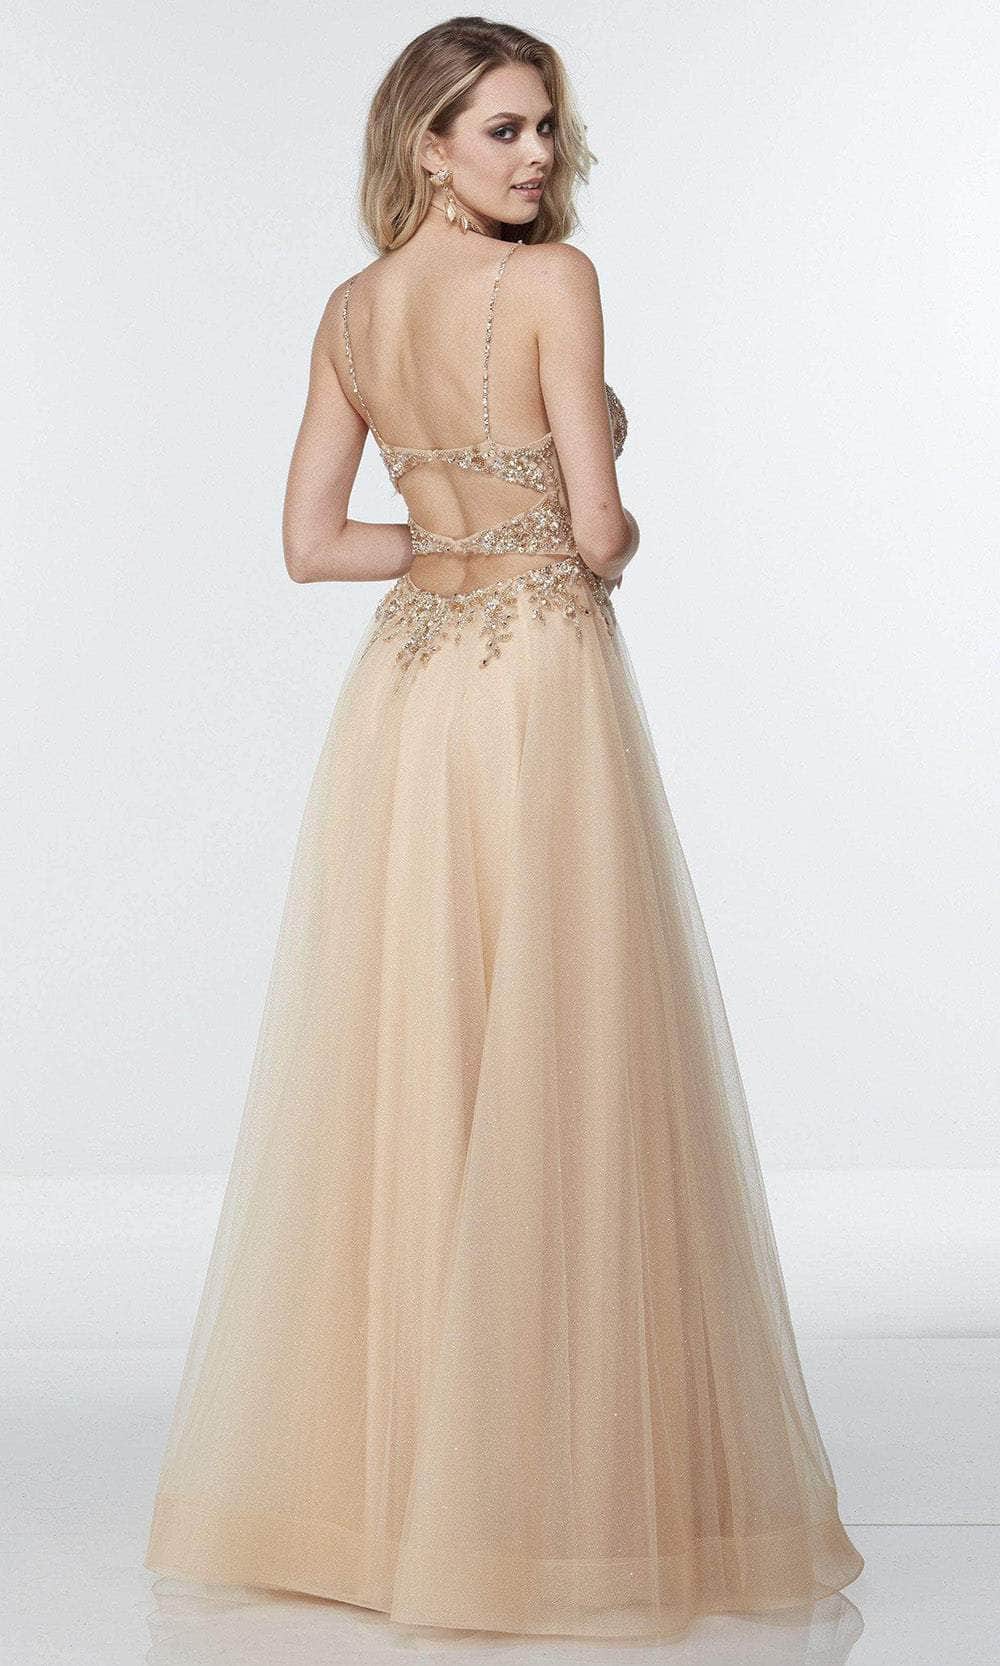 Alyce Paris 61226 - Fitted Bodice Tulle Gown Special Occasion Dress